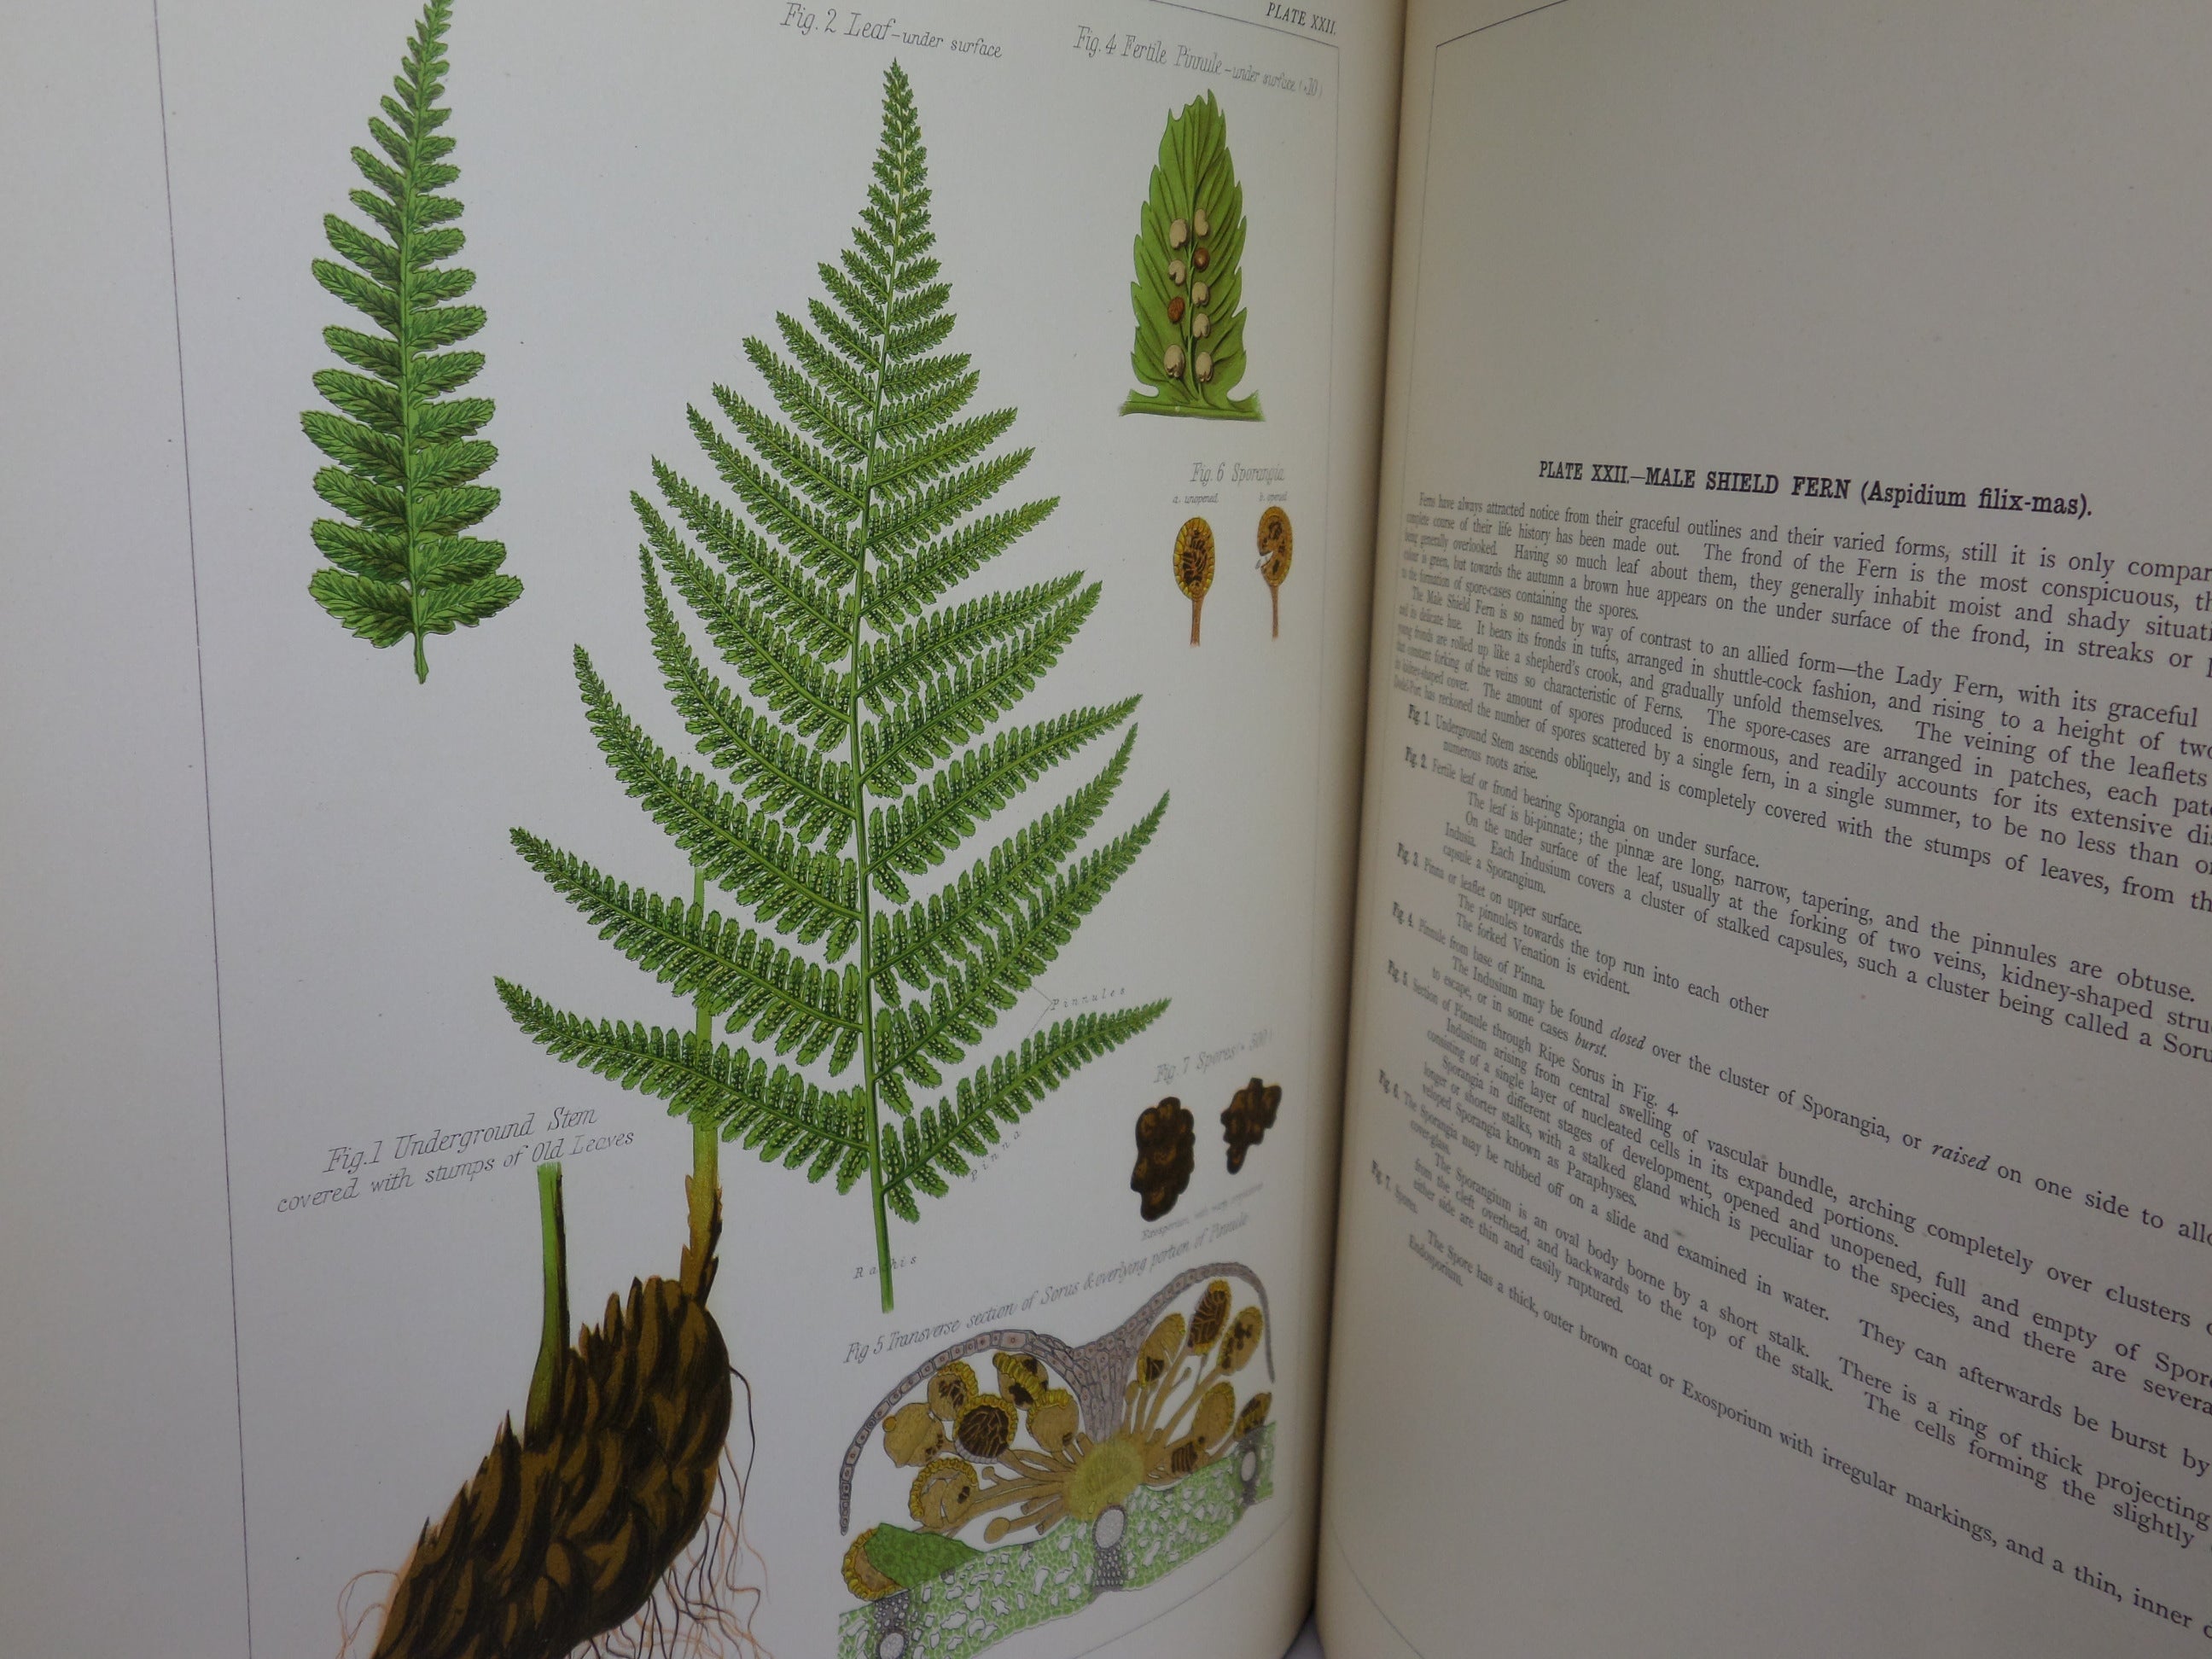 THE BOTANICAL ATLAS; A GUIDE TO THE PRACTICAL STUDY OF PLANTS BY DANIEL MCALPINE 1883